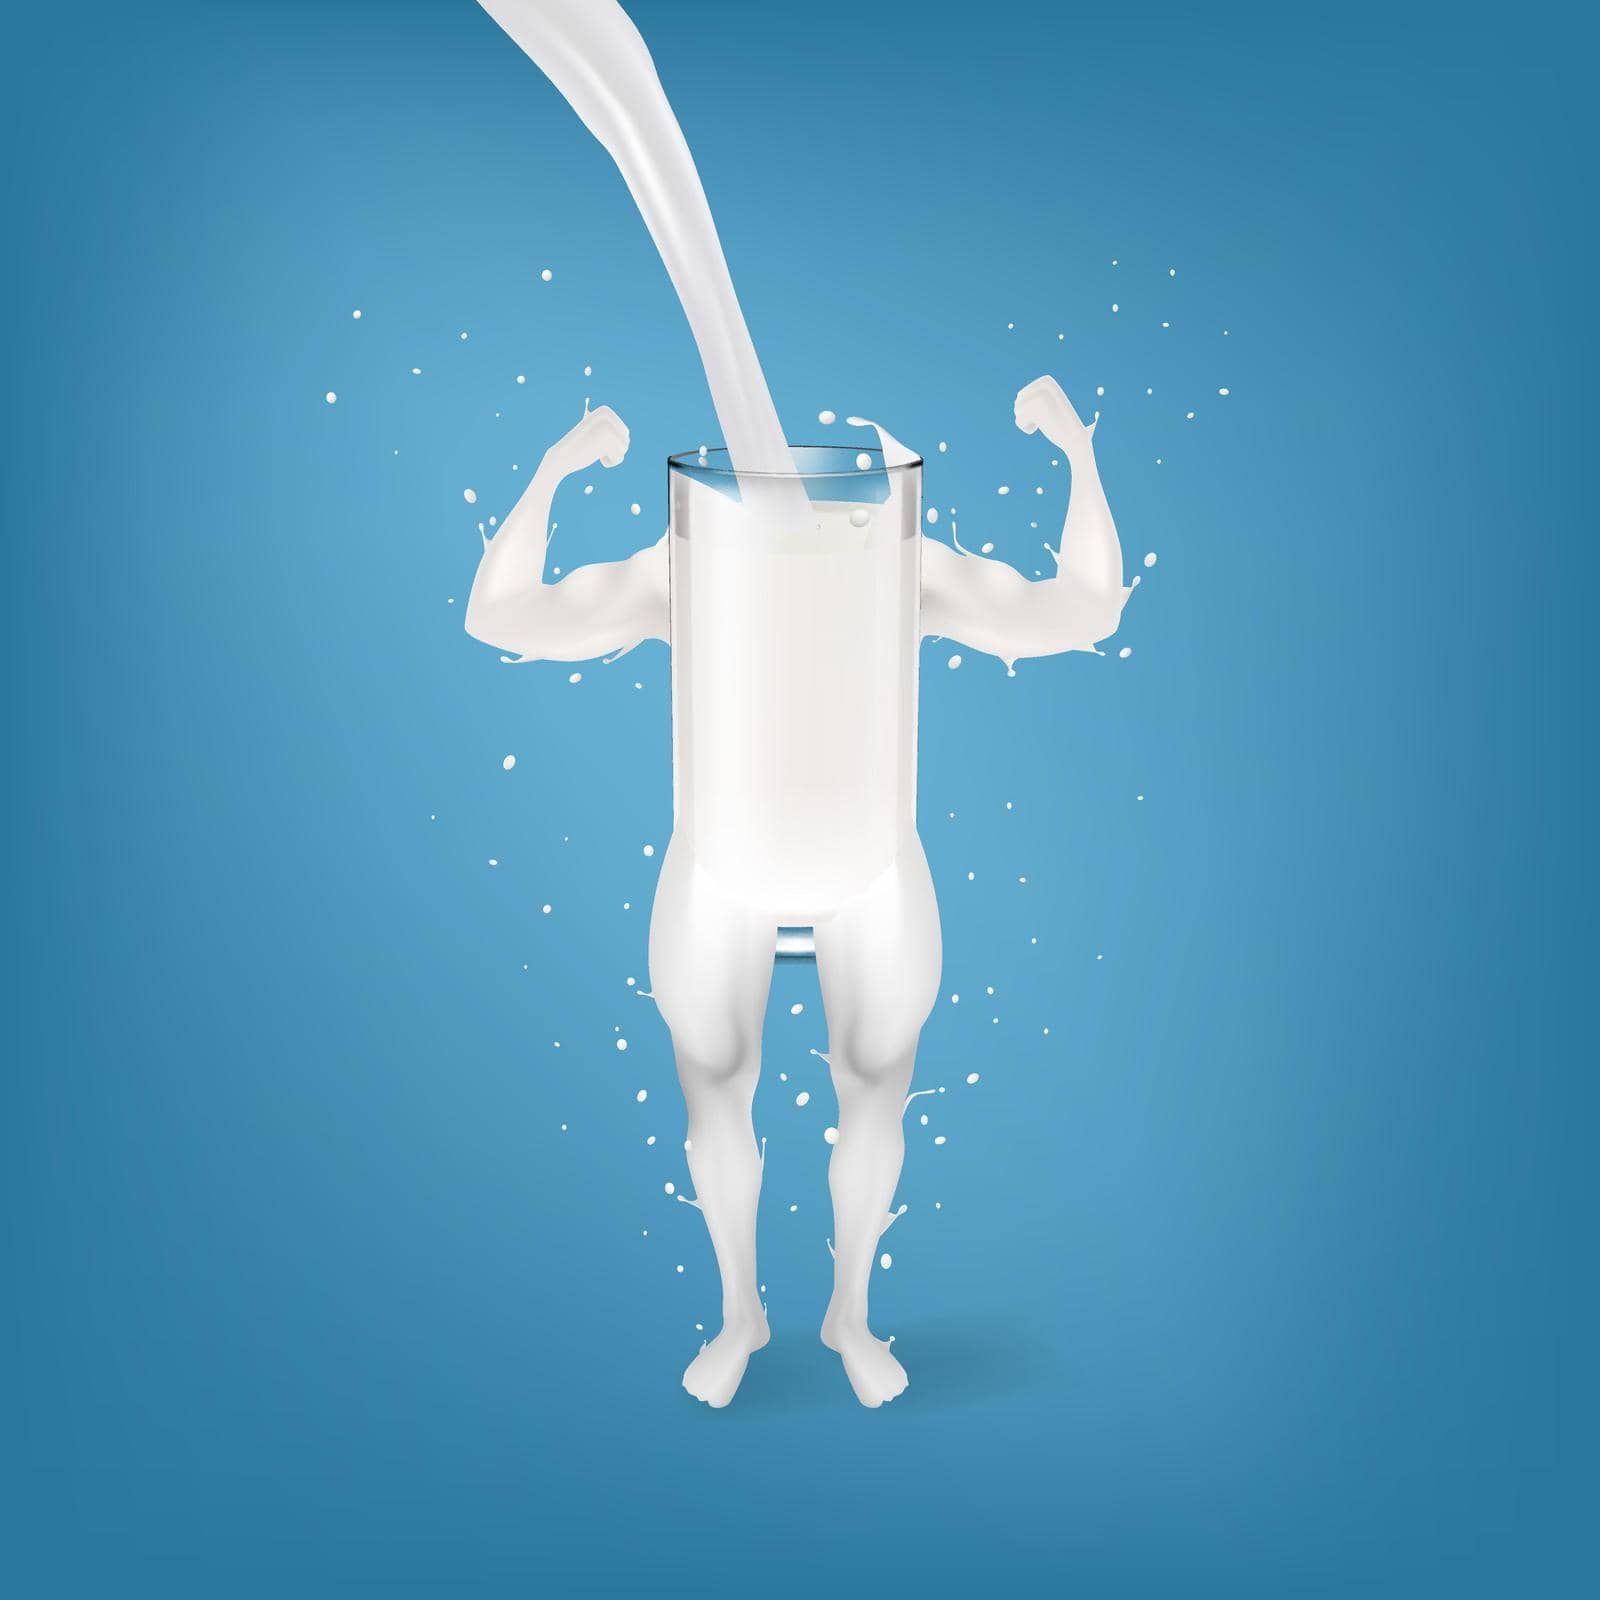 Splash Of Milk In Form Of Strong Arms And Legs by VectorThings